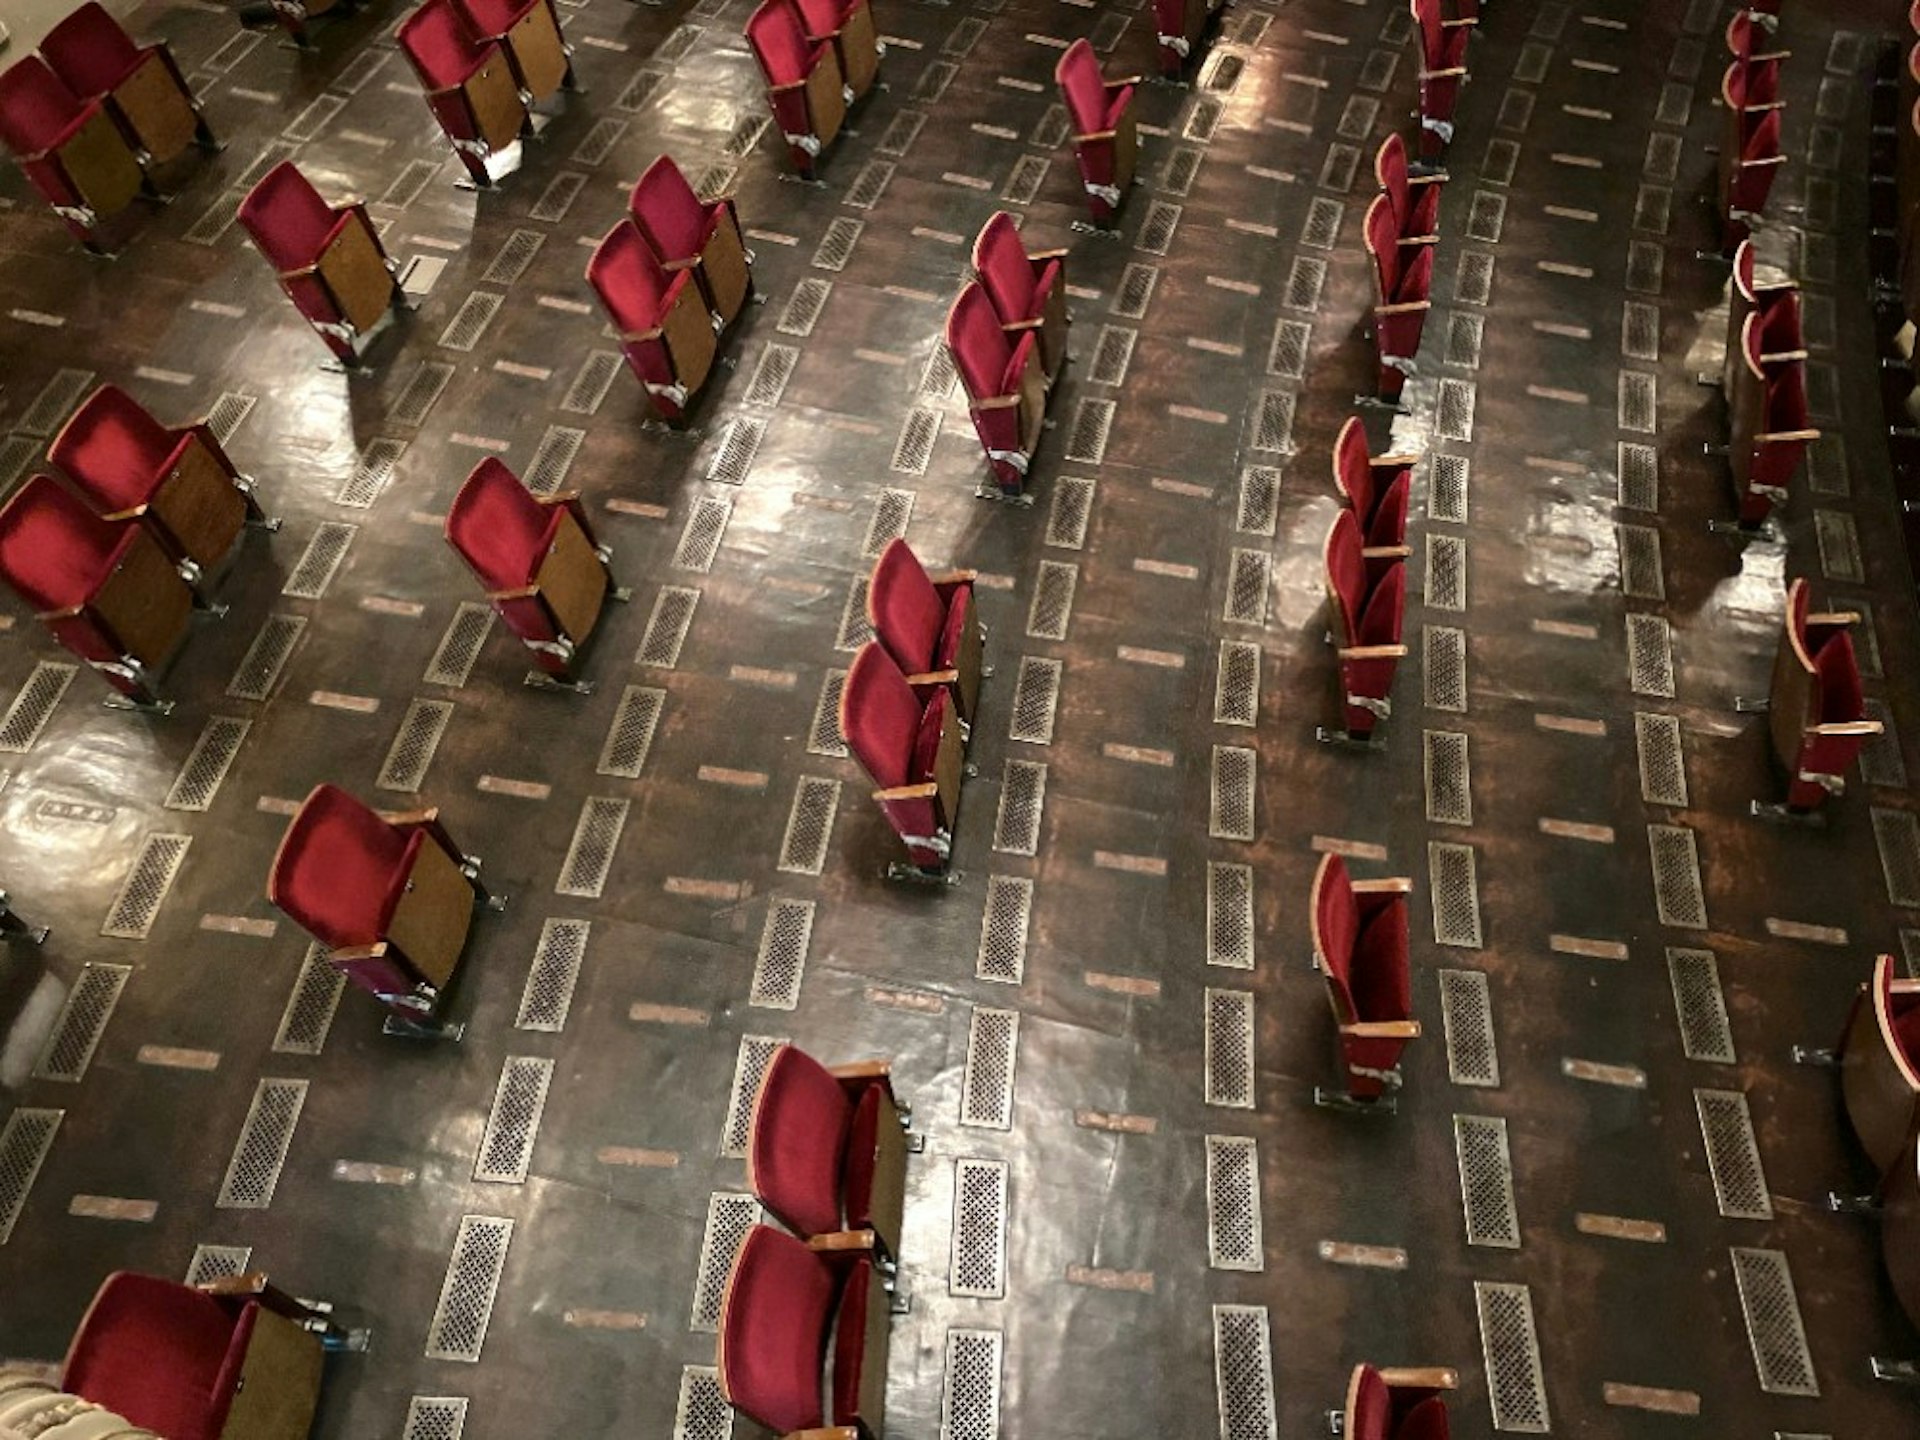 The Theater am Schiffbauerdamm with many of its seats removed